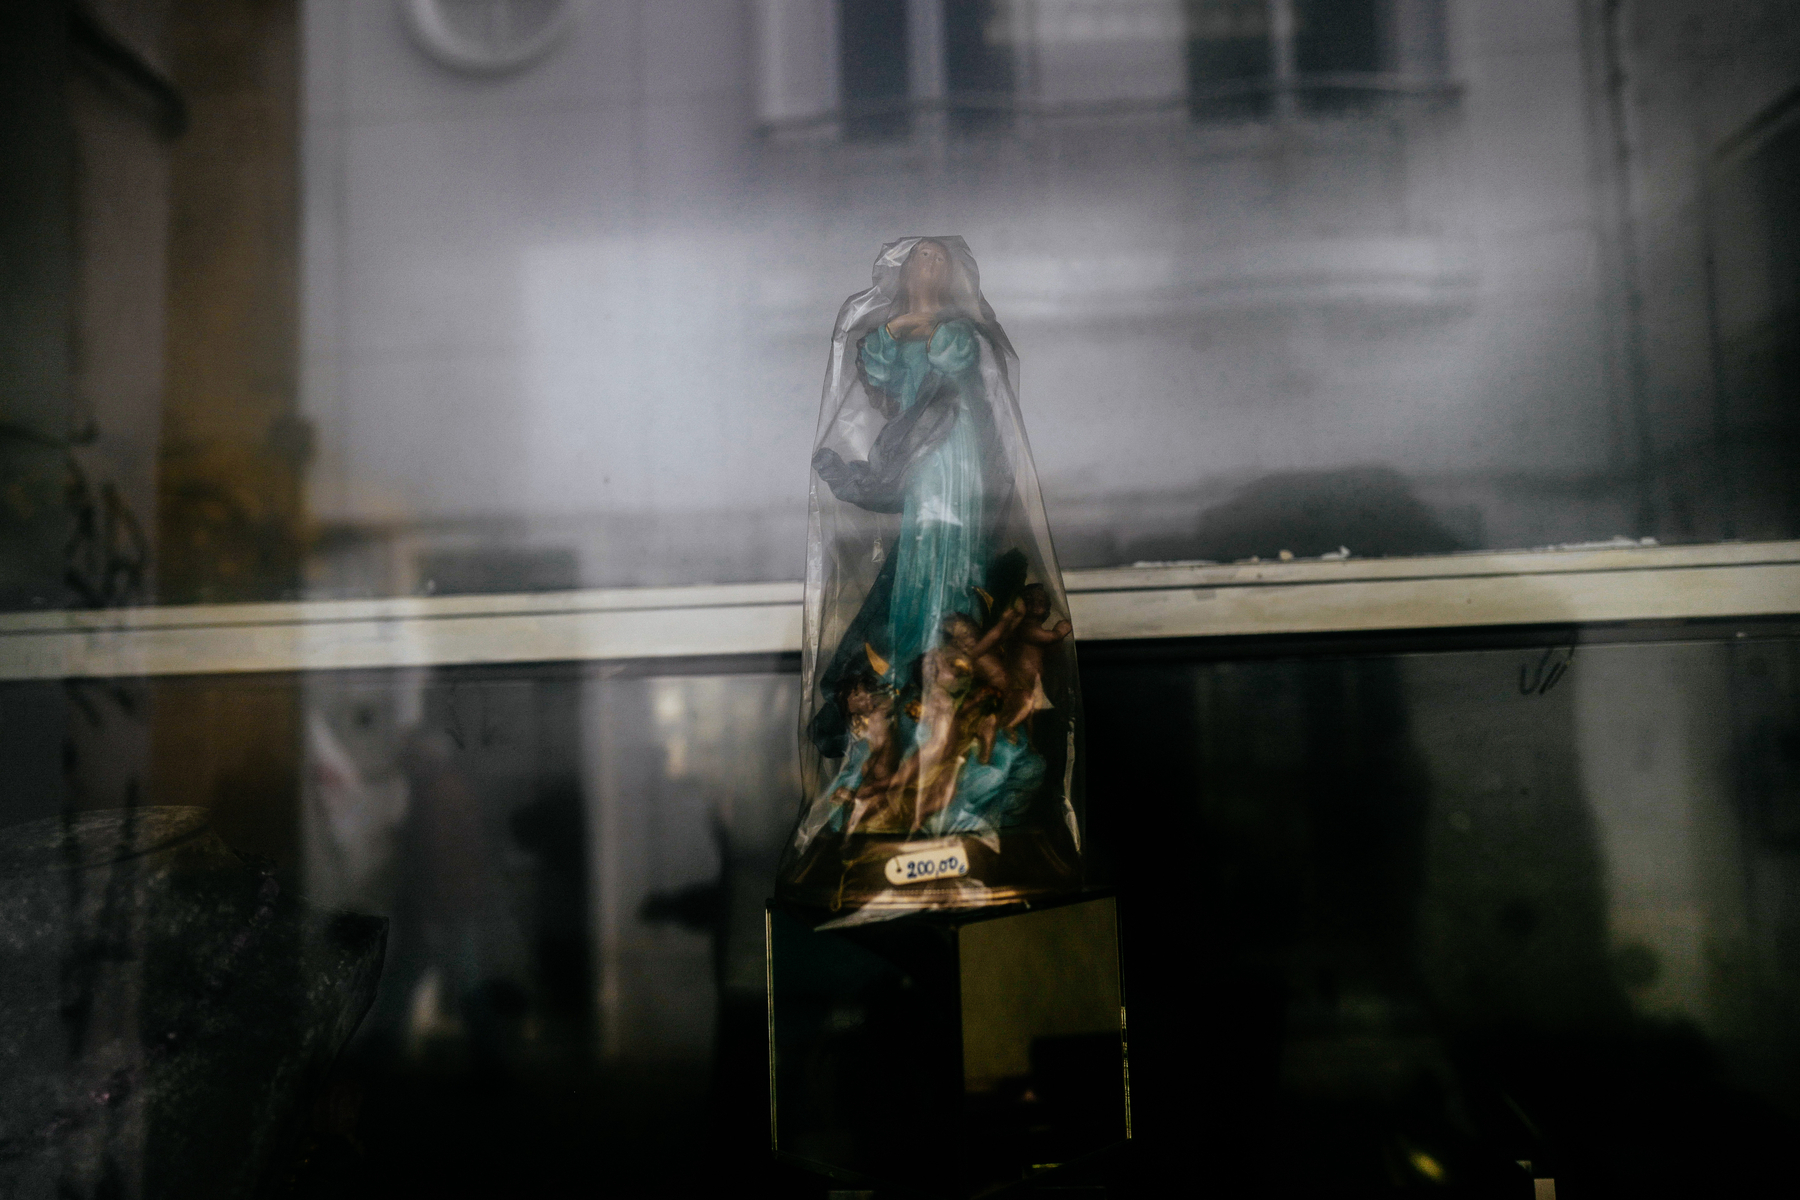 A statue of the Virgin Mary wrapped in plastic, displayed behind a glass window with a €200.00 price tag.